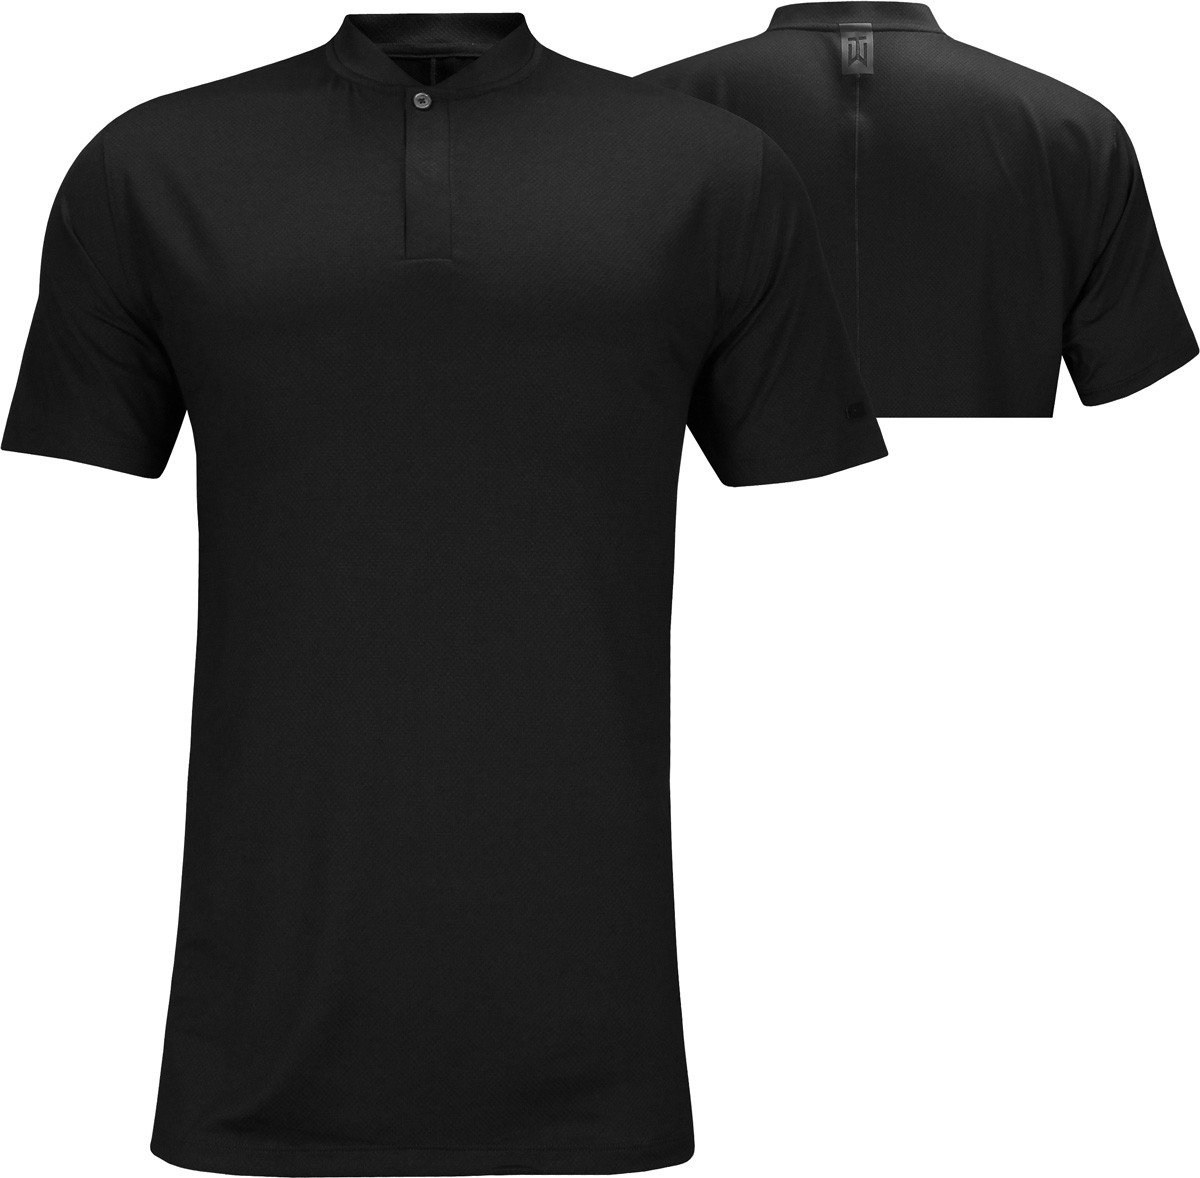 tiger woods style golf shirts